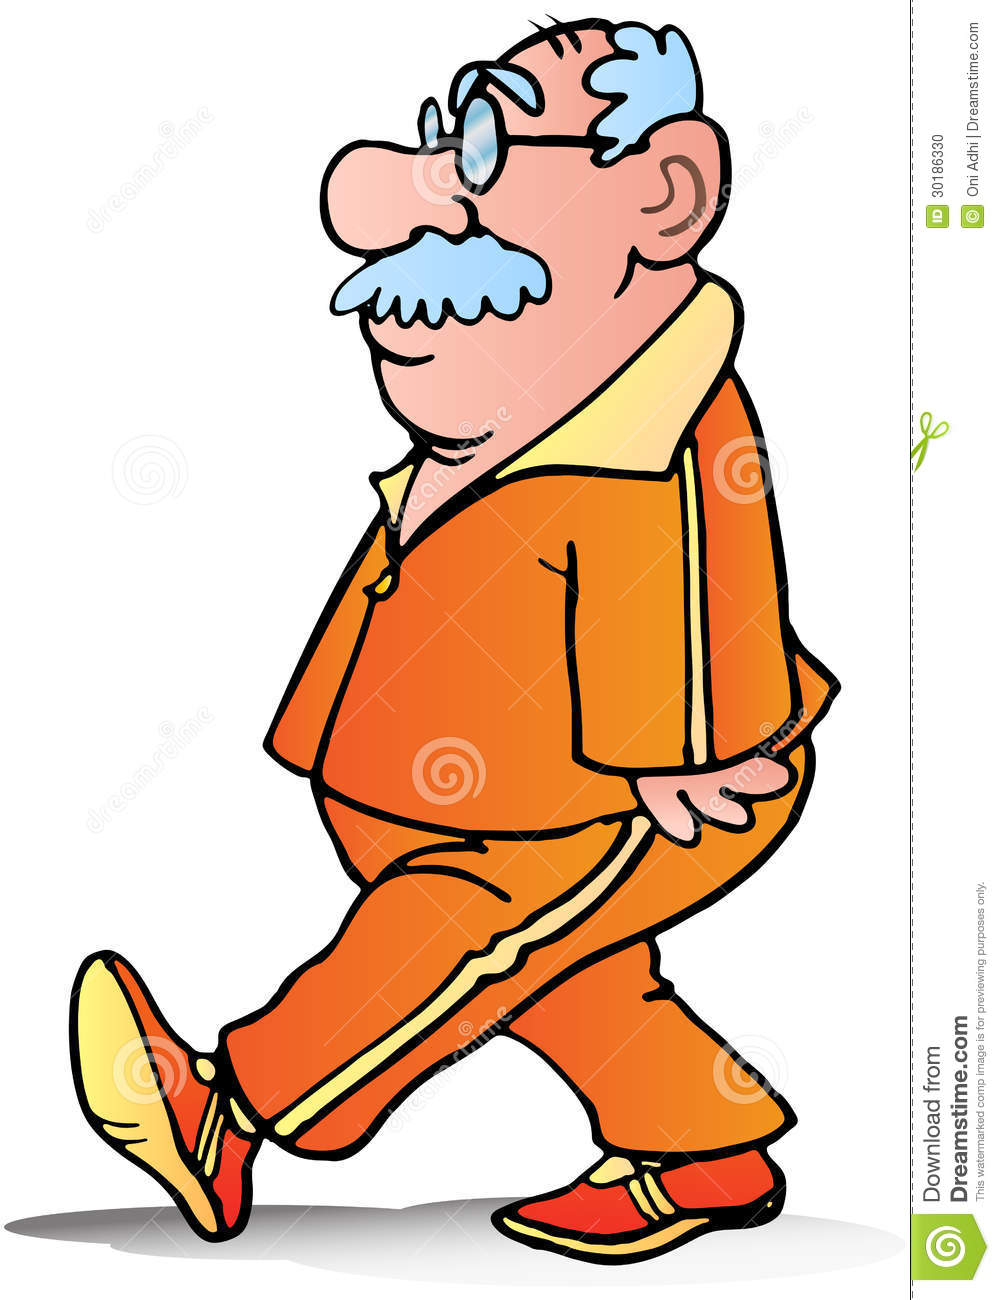 Illustration Of A Grandpa Doing Jogging On Isolated White Background